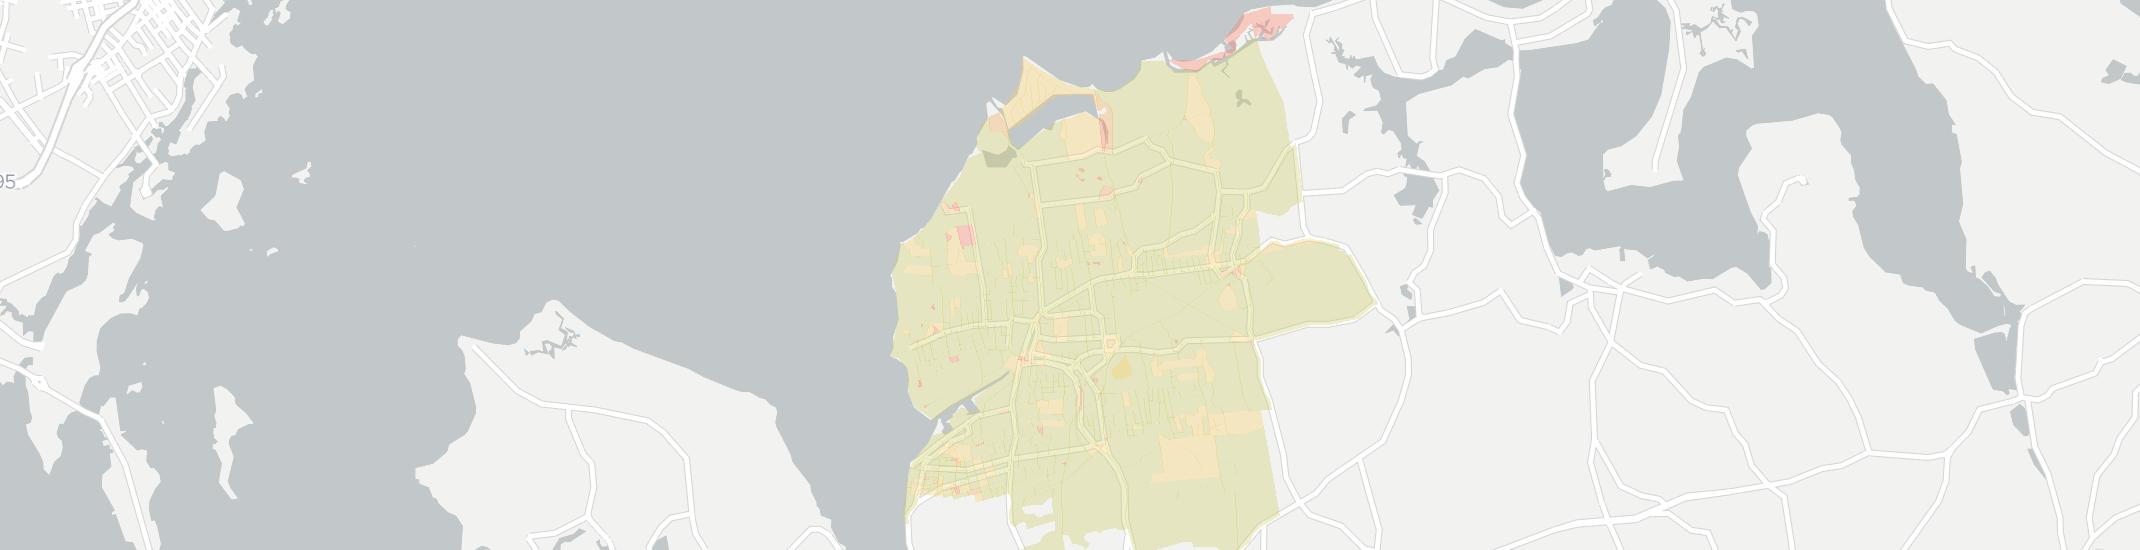 Glen Cove Internet Competition Map. Click for interactive map.